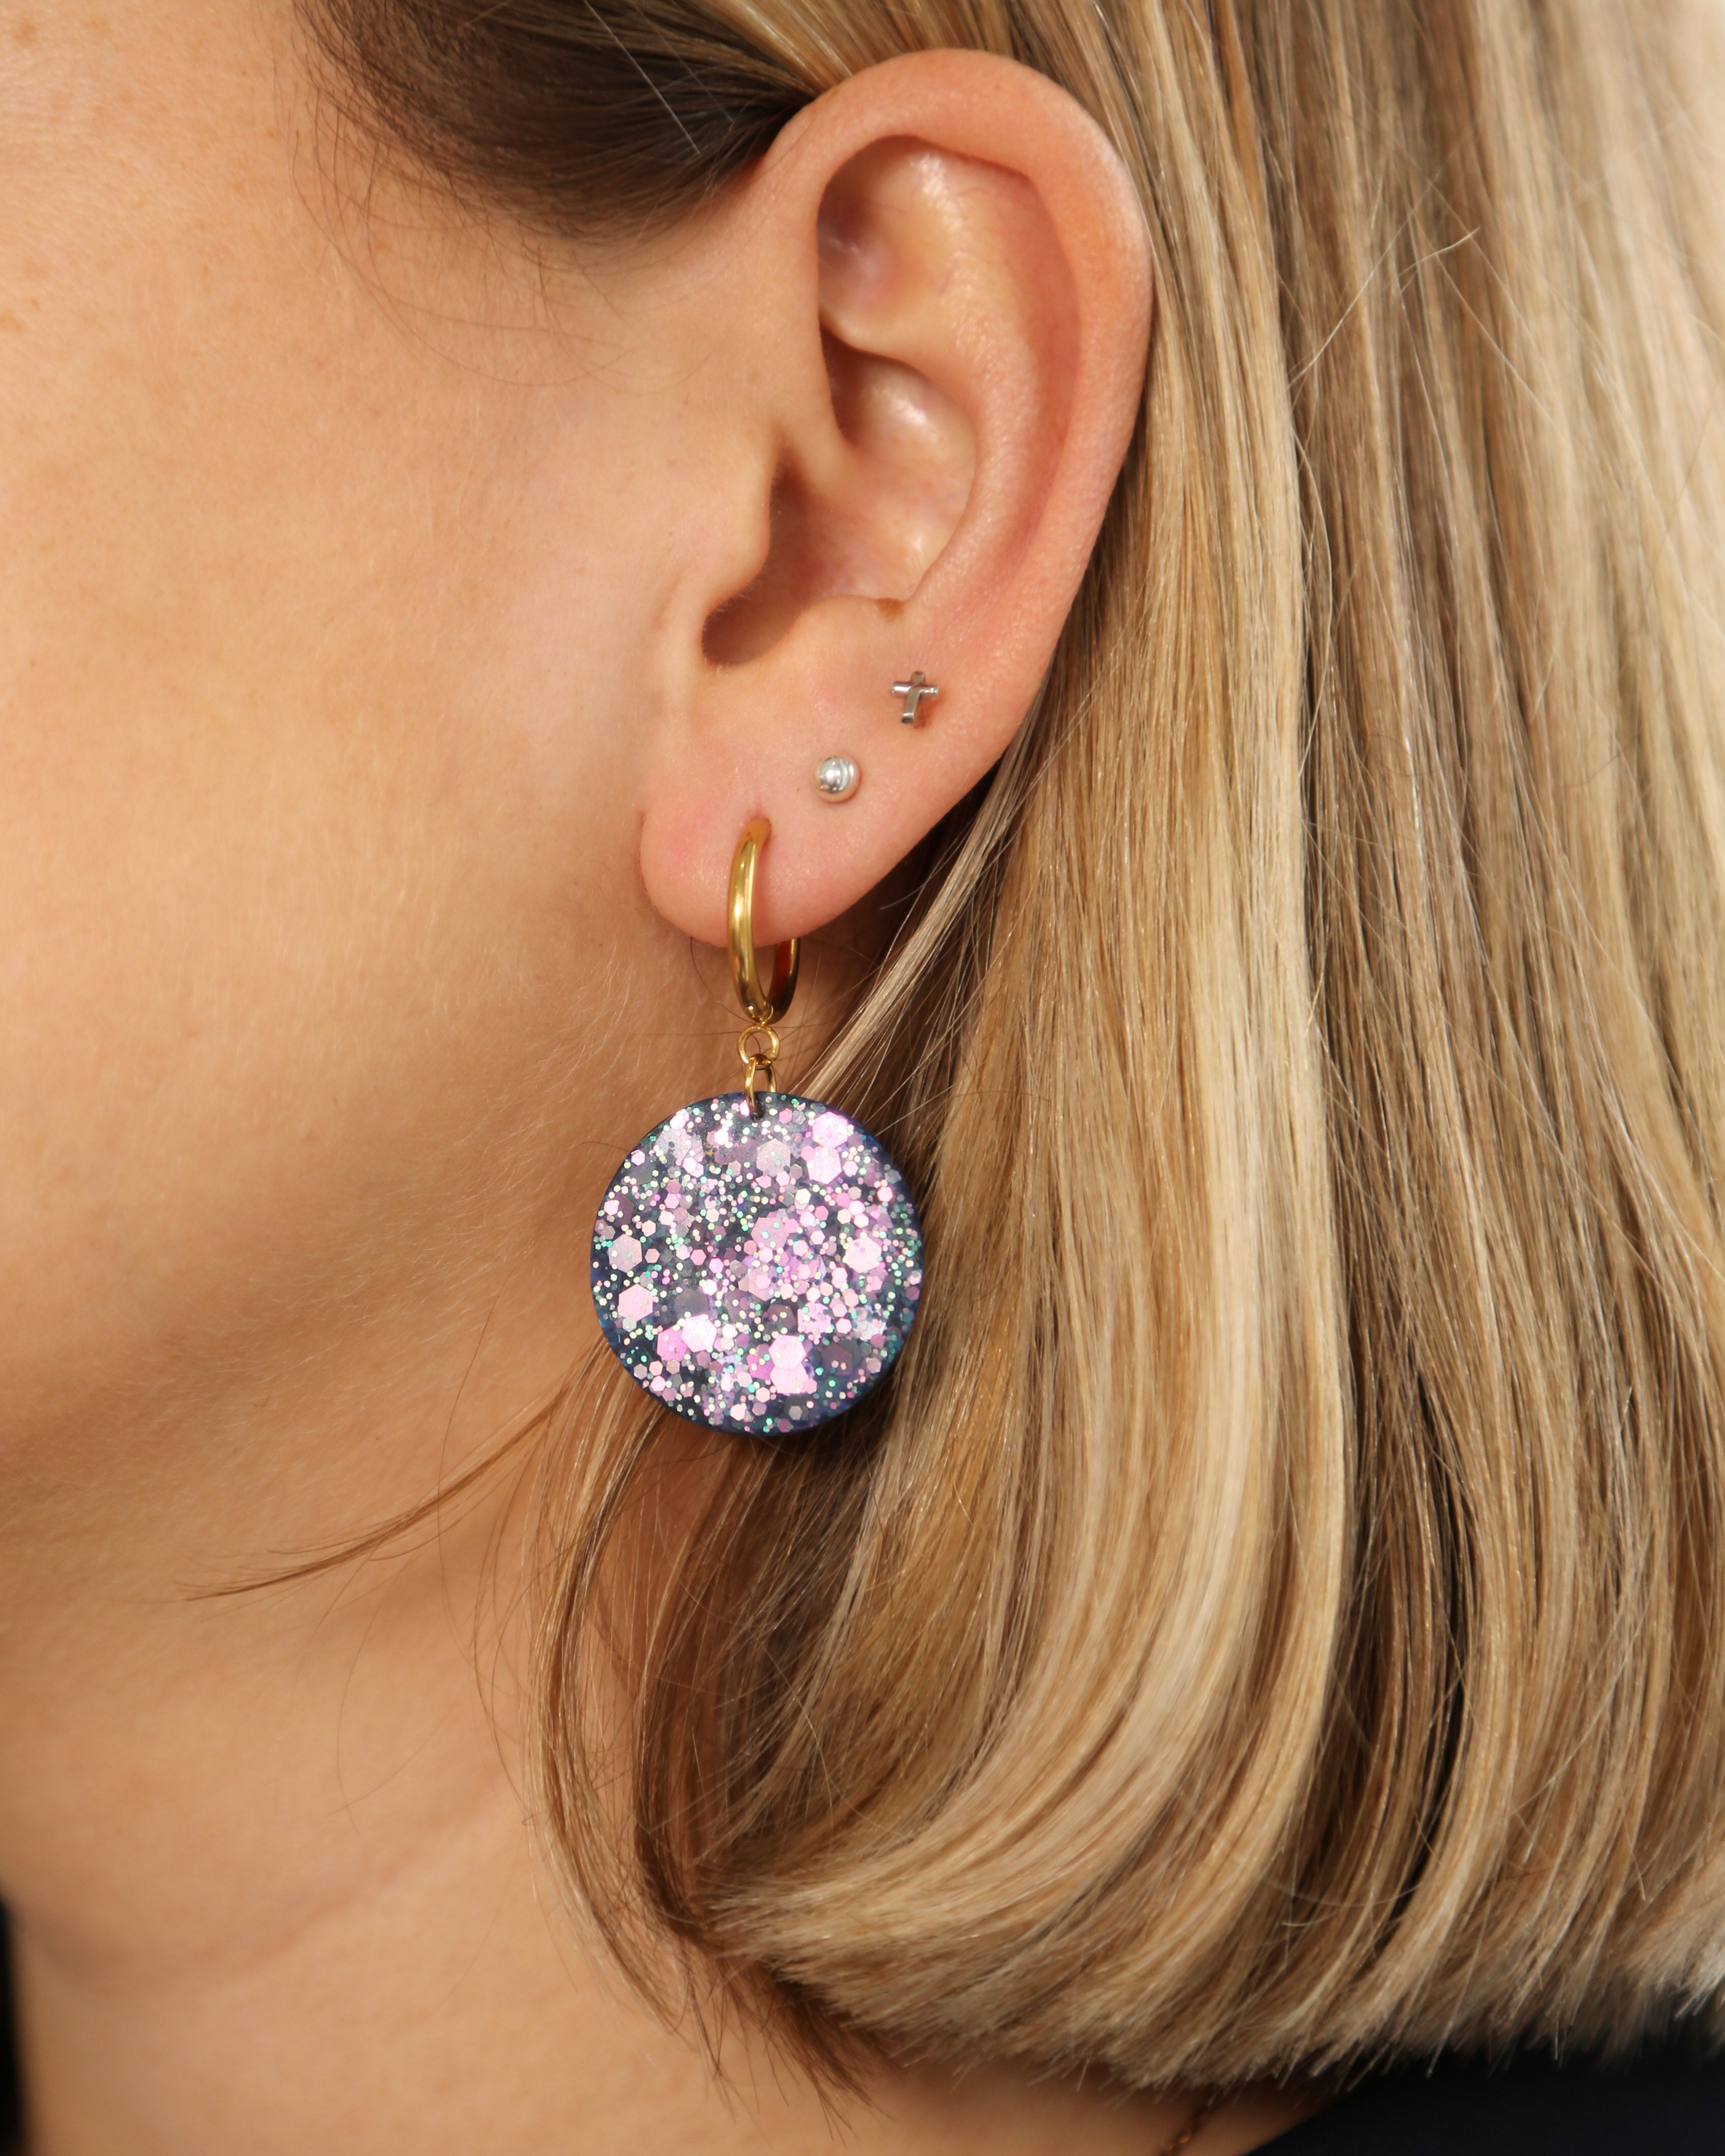 Delicate fashion statement earrings made from crystal resin